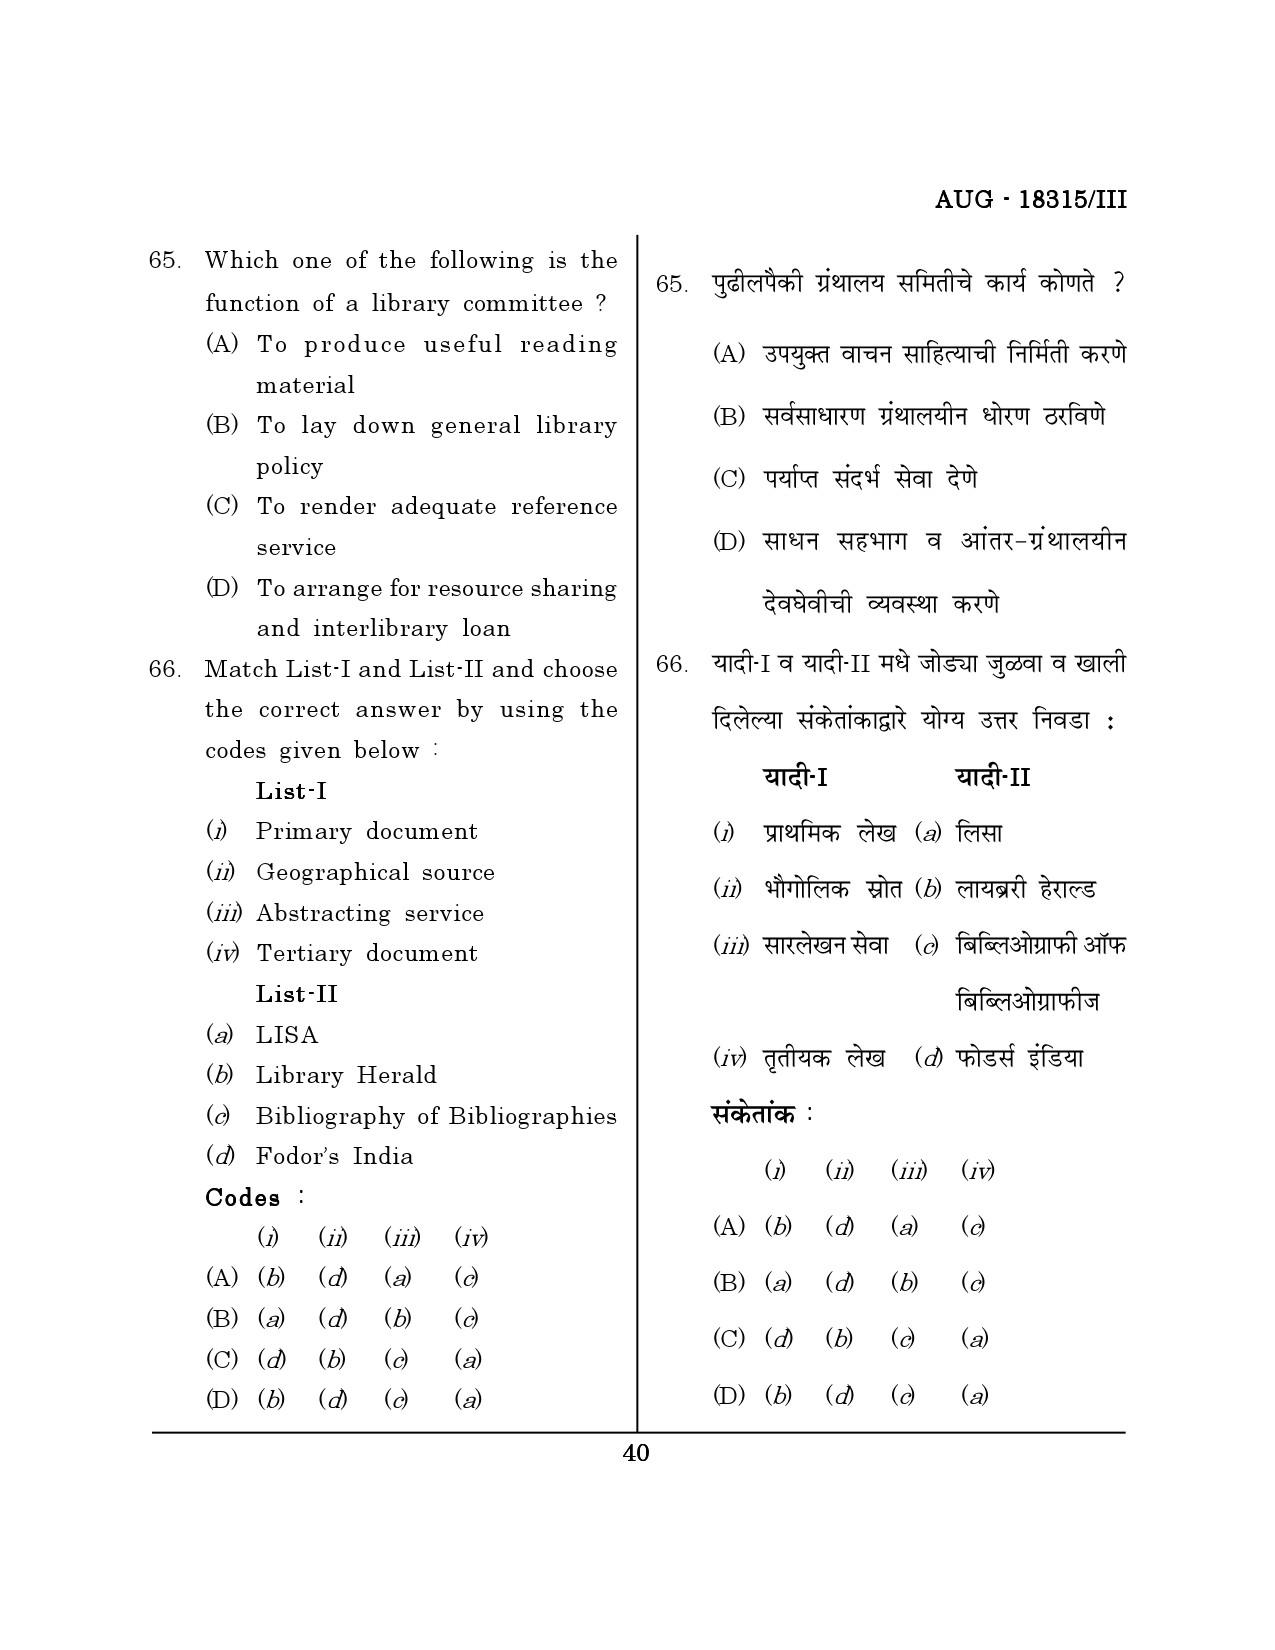 Maharashtra SET Library Information Science Question Paper III August 2015 39